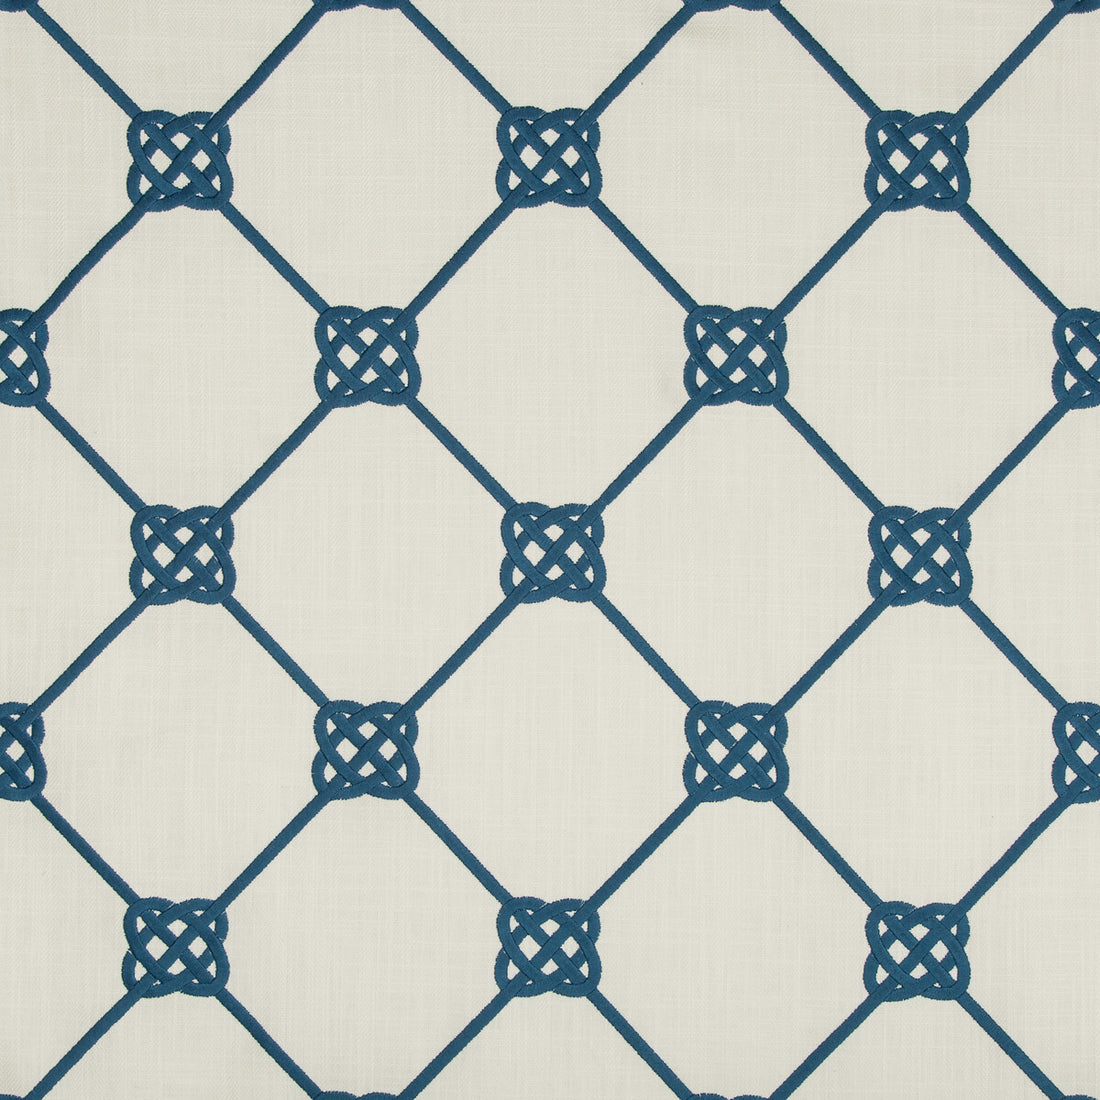 Knotbridge fabric in marine color - pattern 35540.5.0 - by Kravet Basics in the Bermuda collection